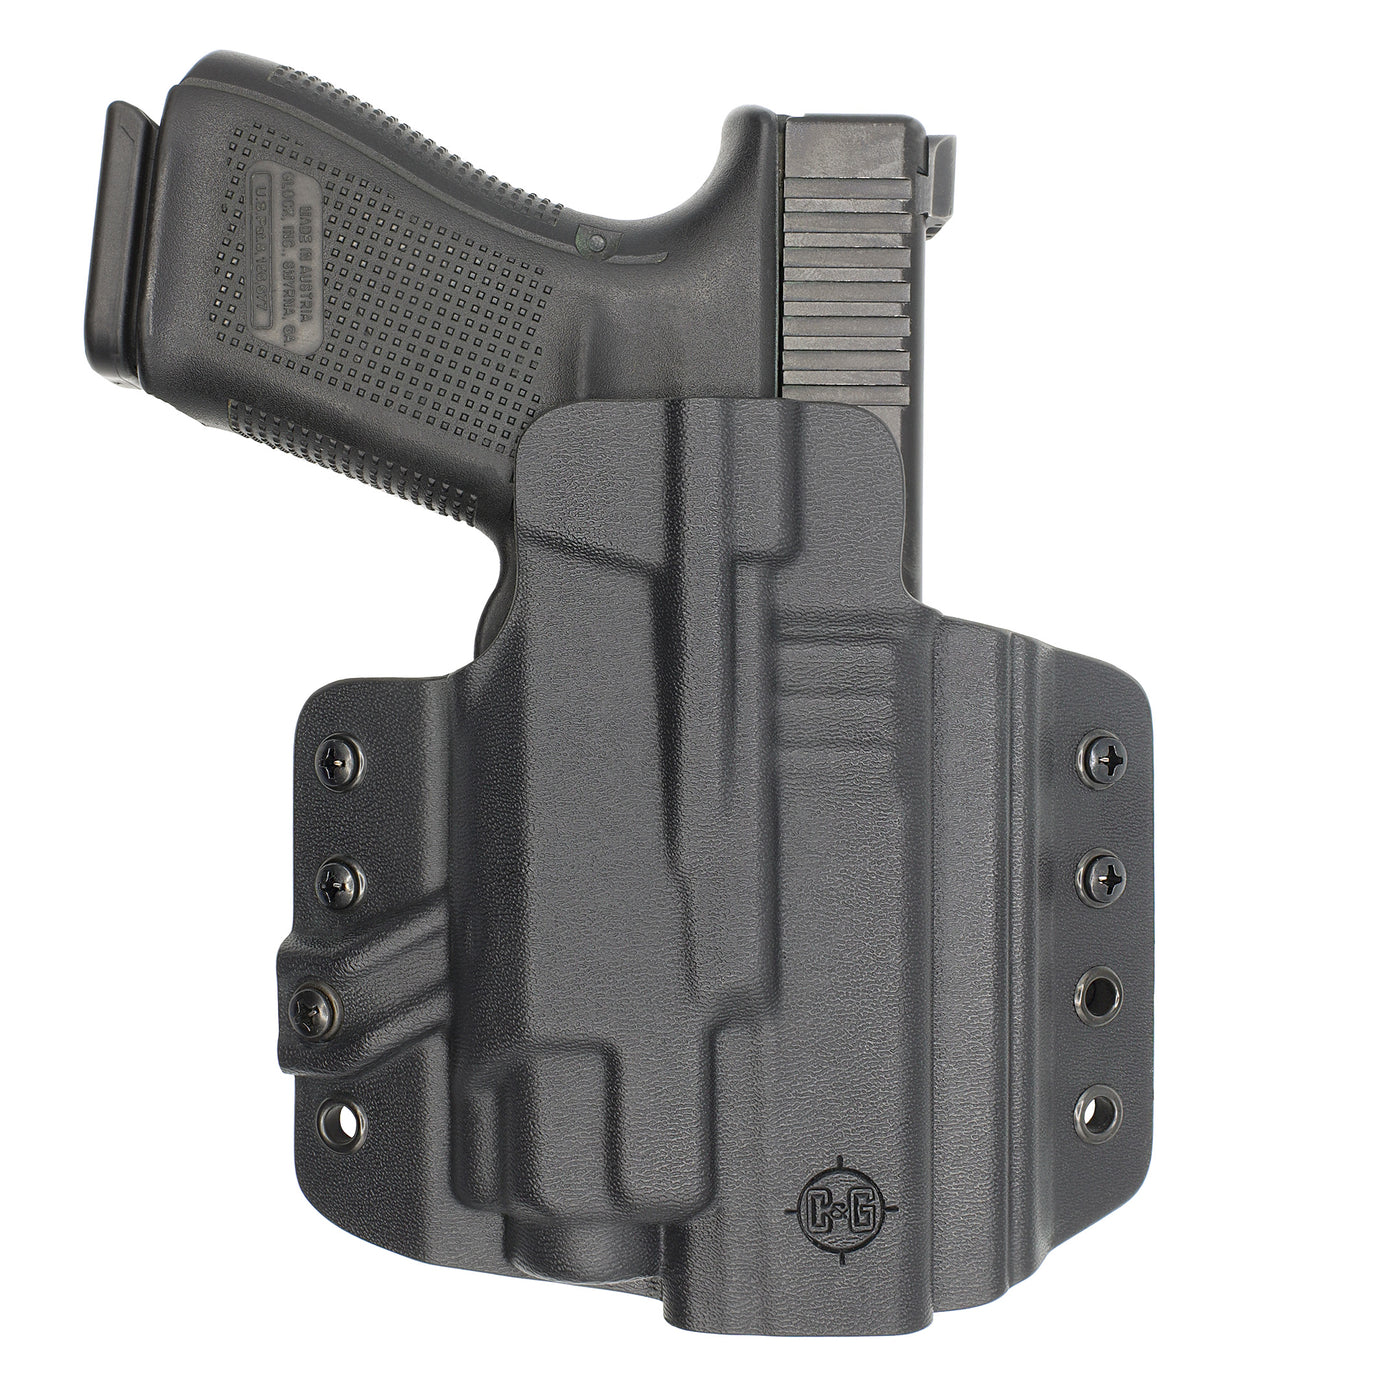 C&G Holsters custom OWB Tactical Poly80 streamlight TLR8 holstered